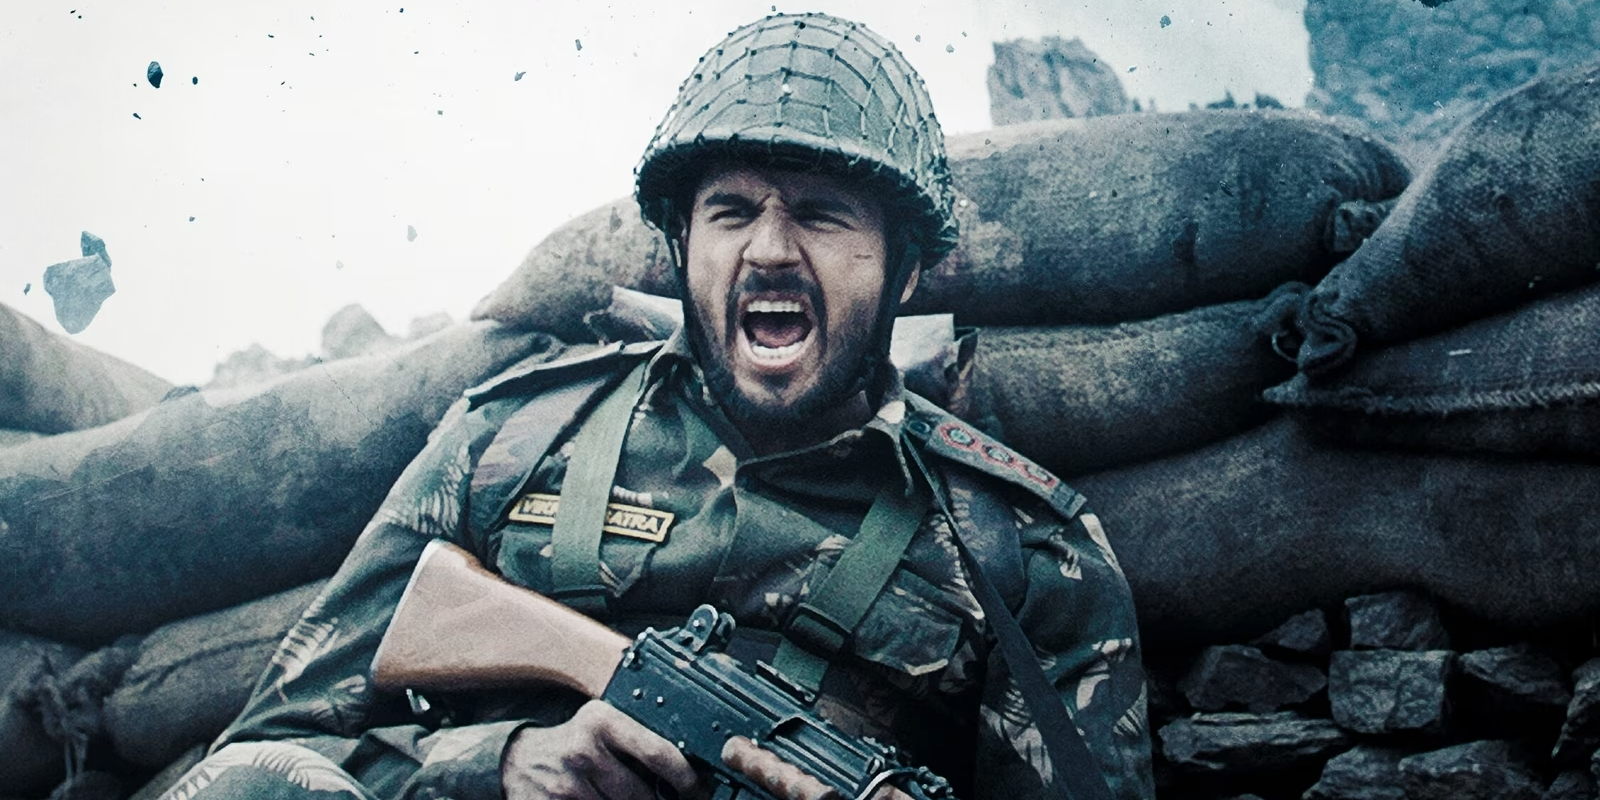 Best War Movies on Prime Video to Watch Right Now